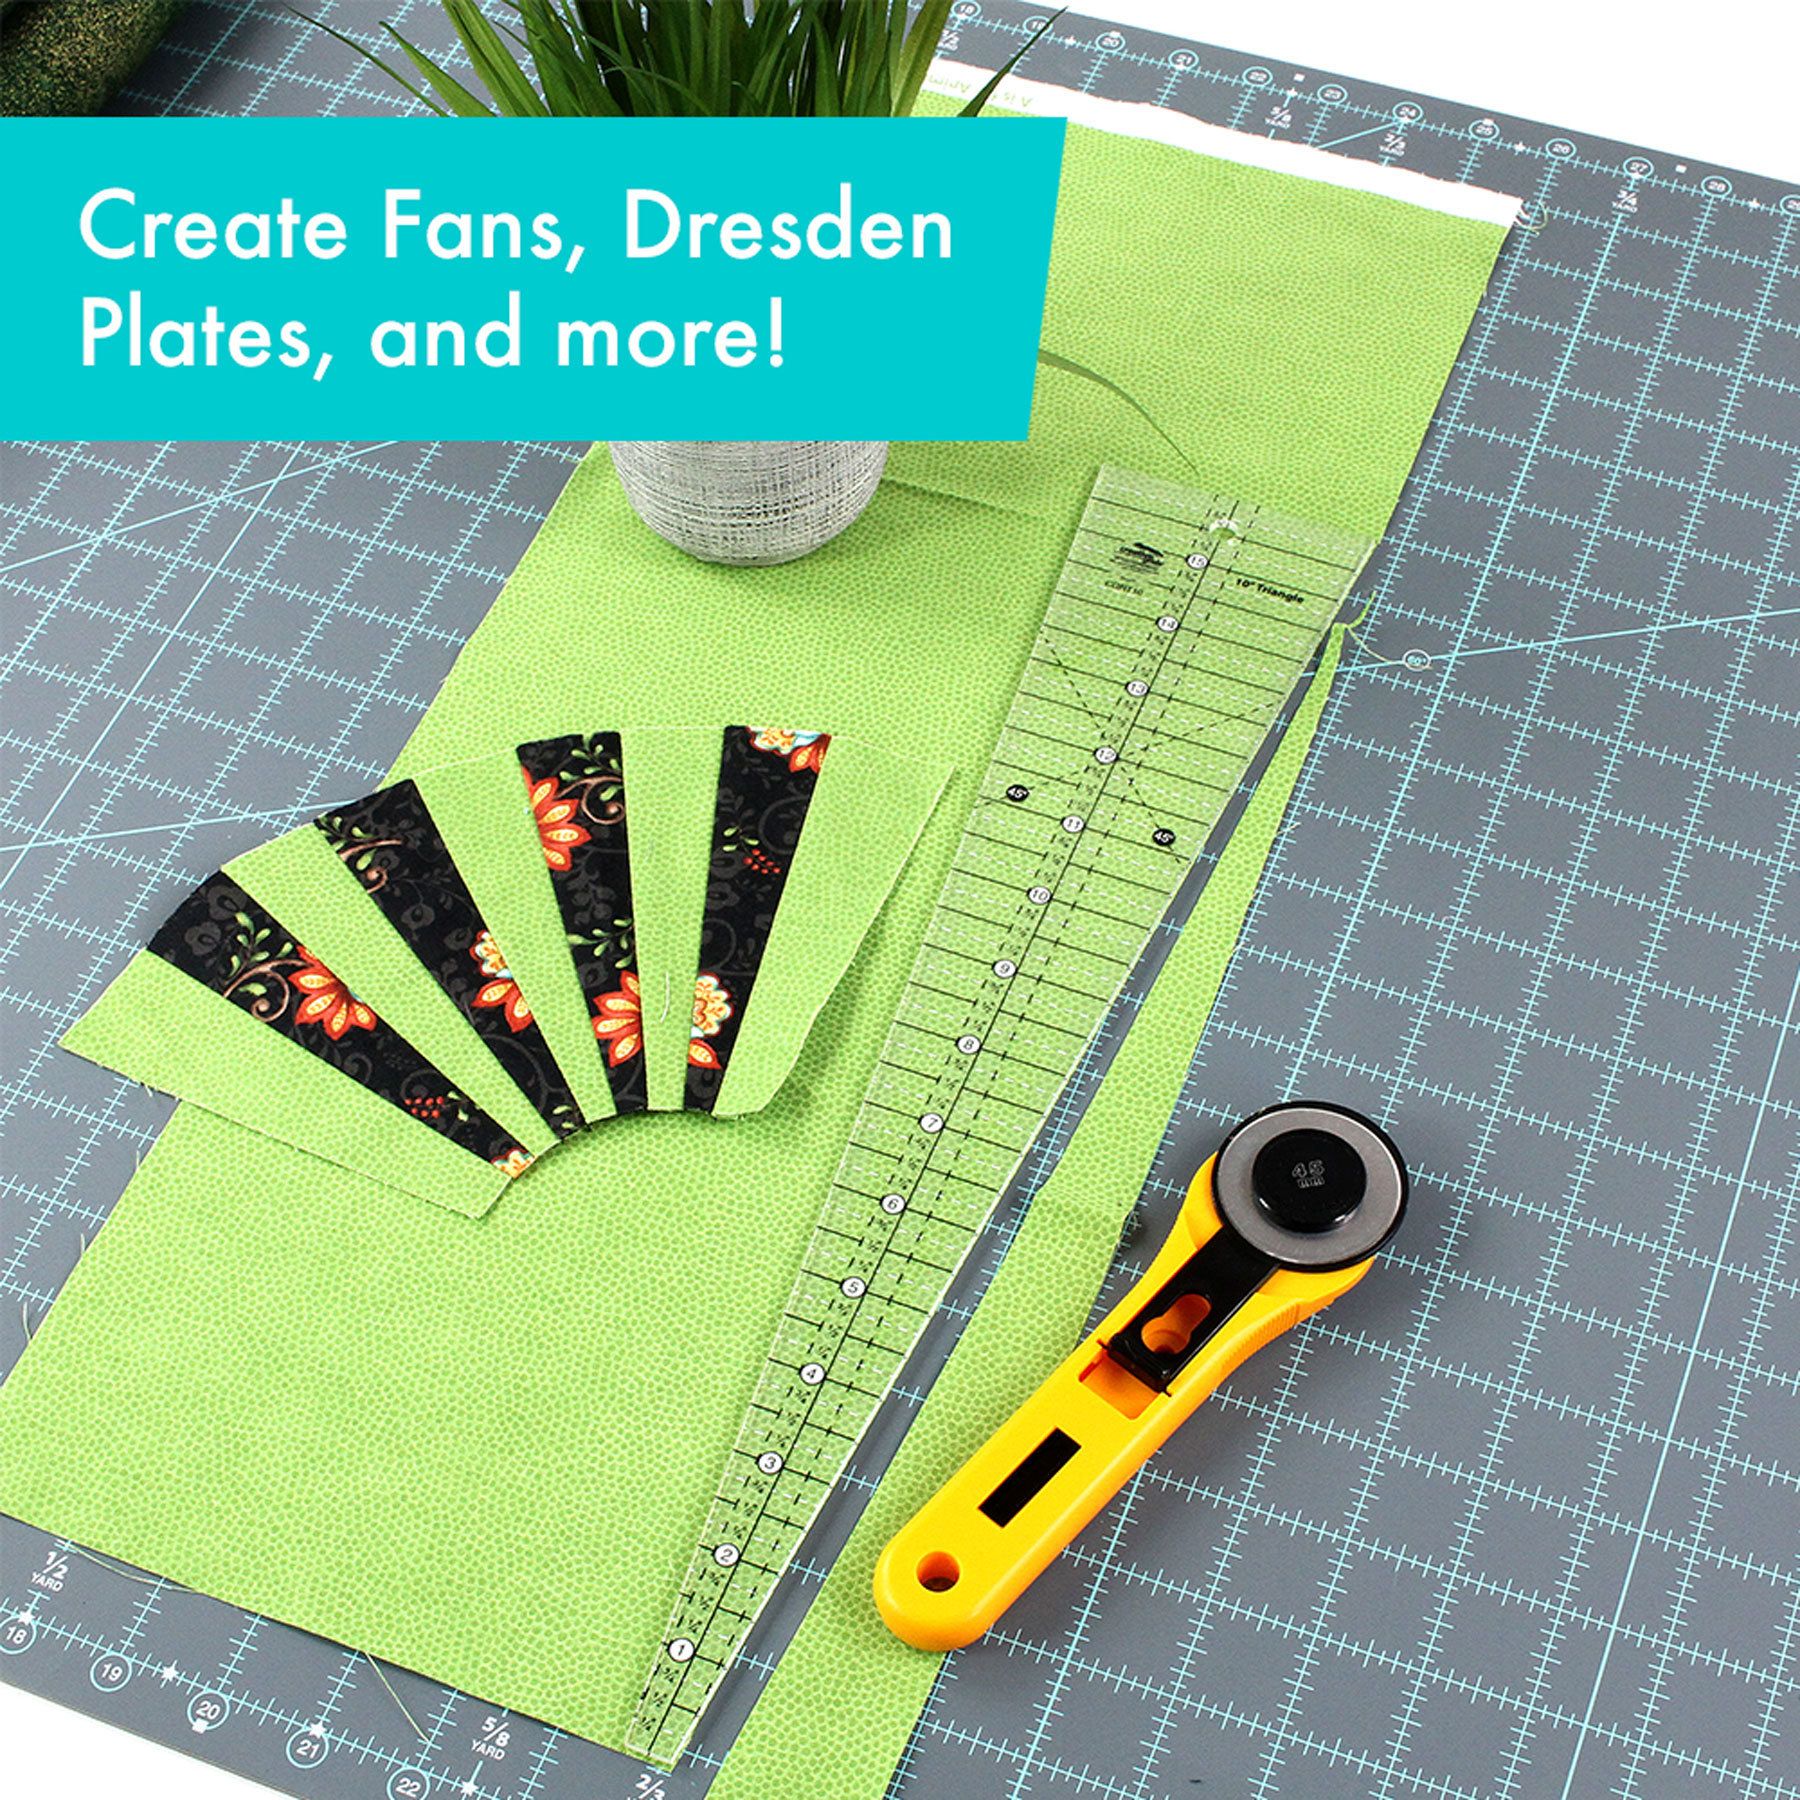 Creative Grids 10 Degree Triangle Ruler CGRT10 for Sale at World Weidner